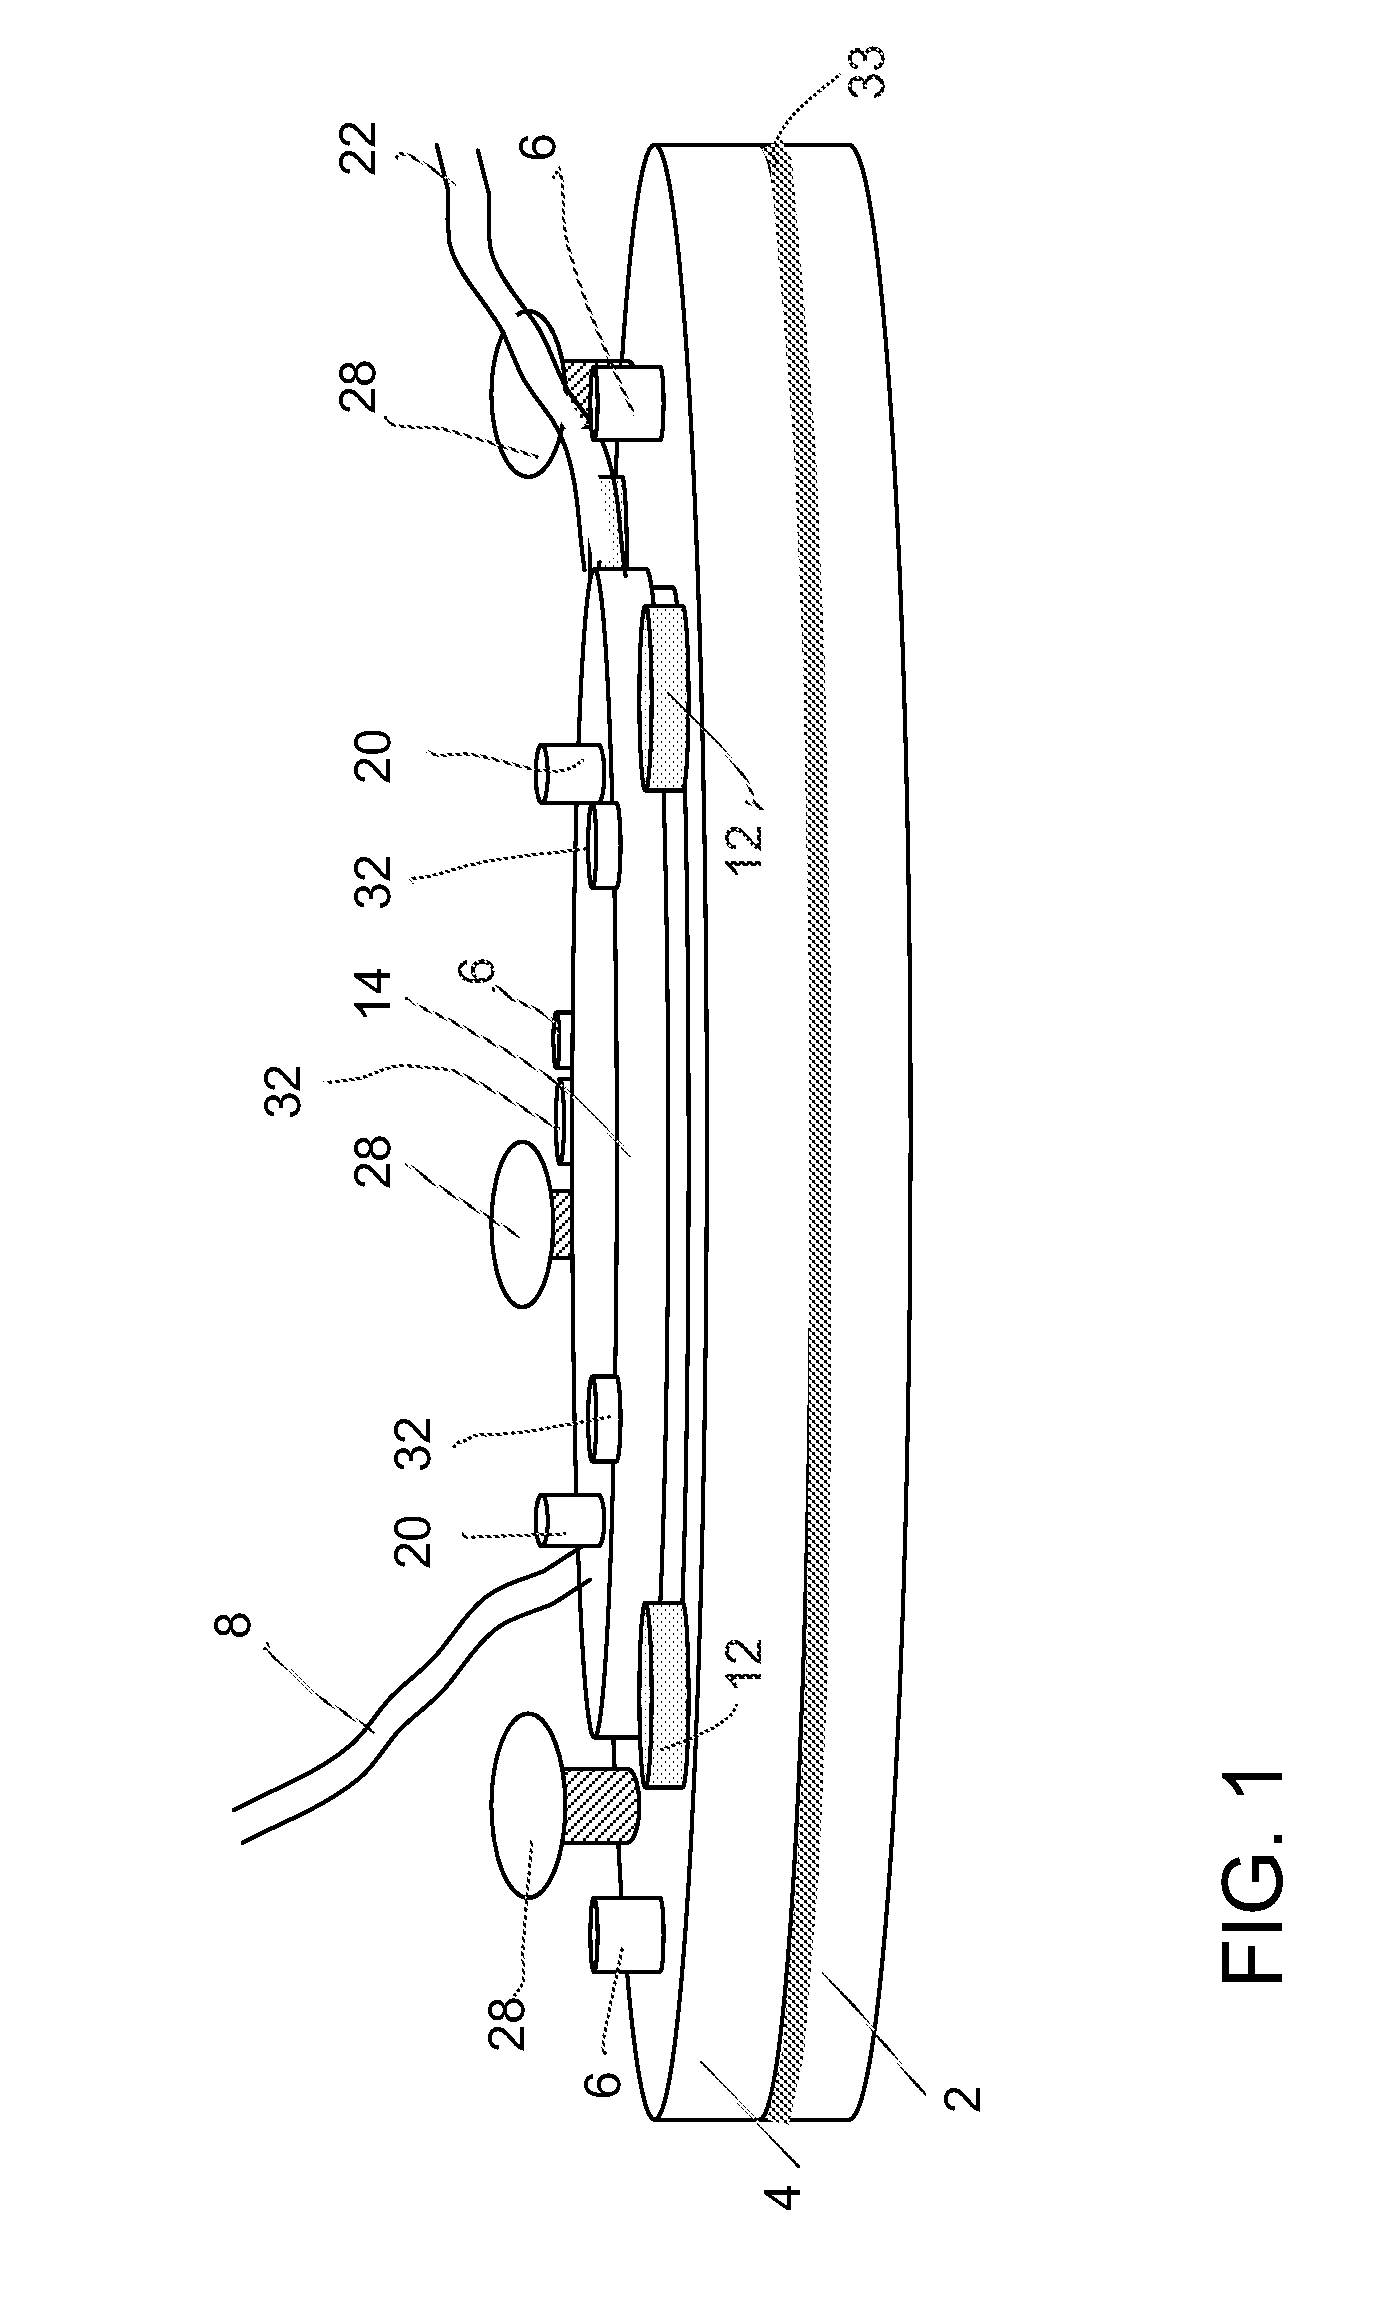 Microfluidic system and method for using same